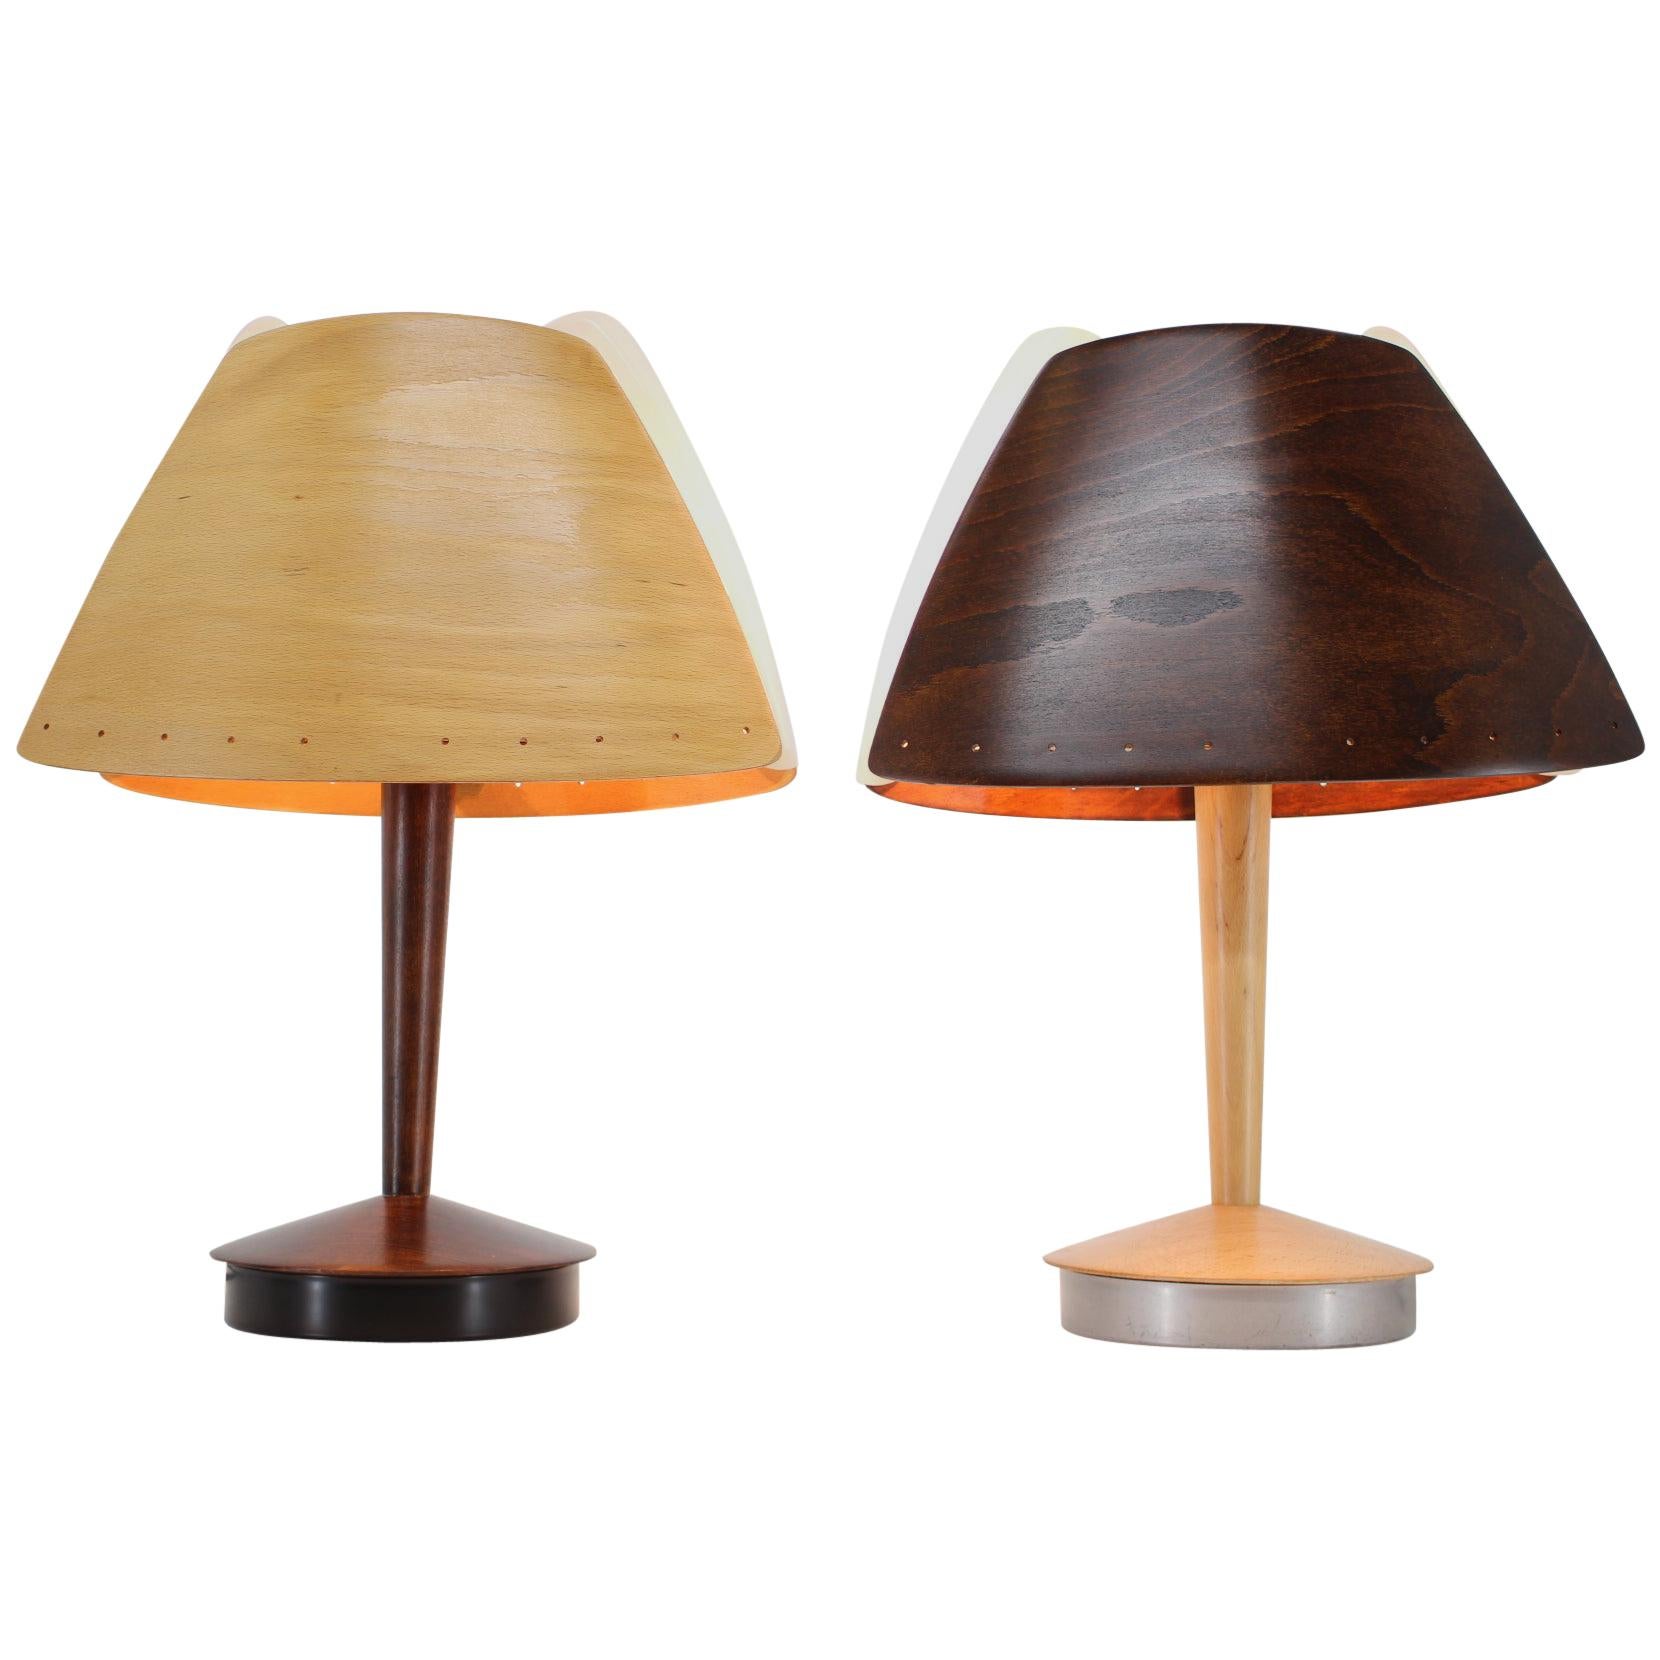 Pair of Midcentury French Design Wooden Table Lamp by Lucid / 1970s, Renovated For Sale